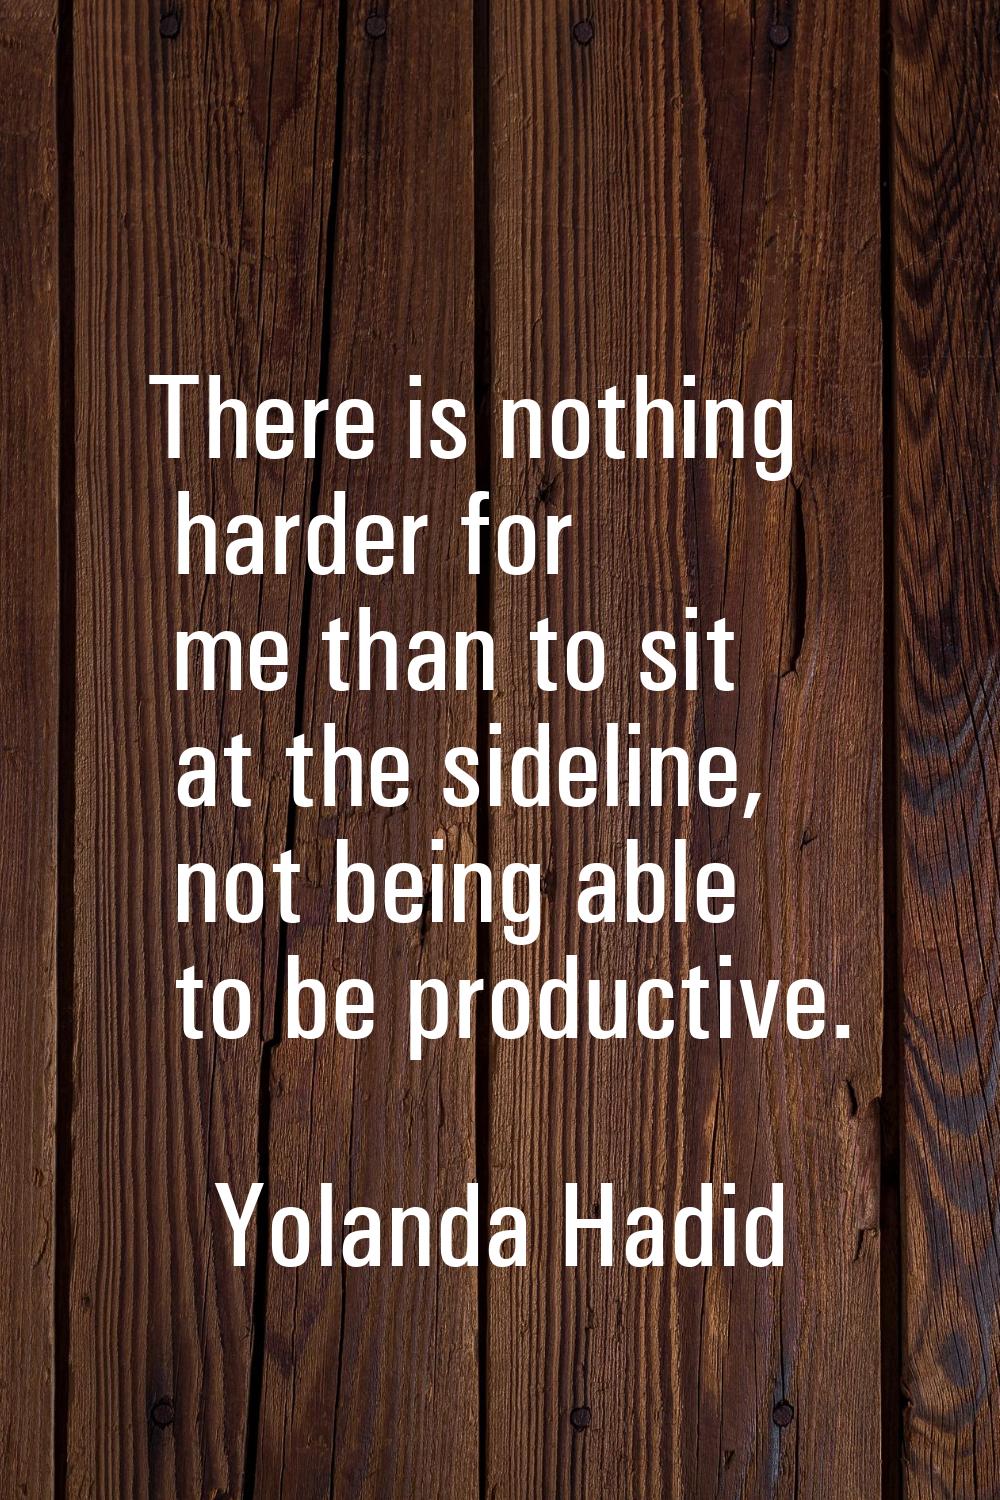 There is nothing harder for me than to sit at the sideline, not being able to be productive.